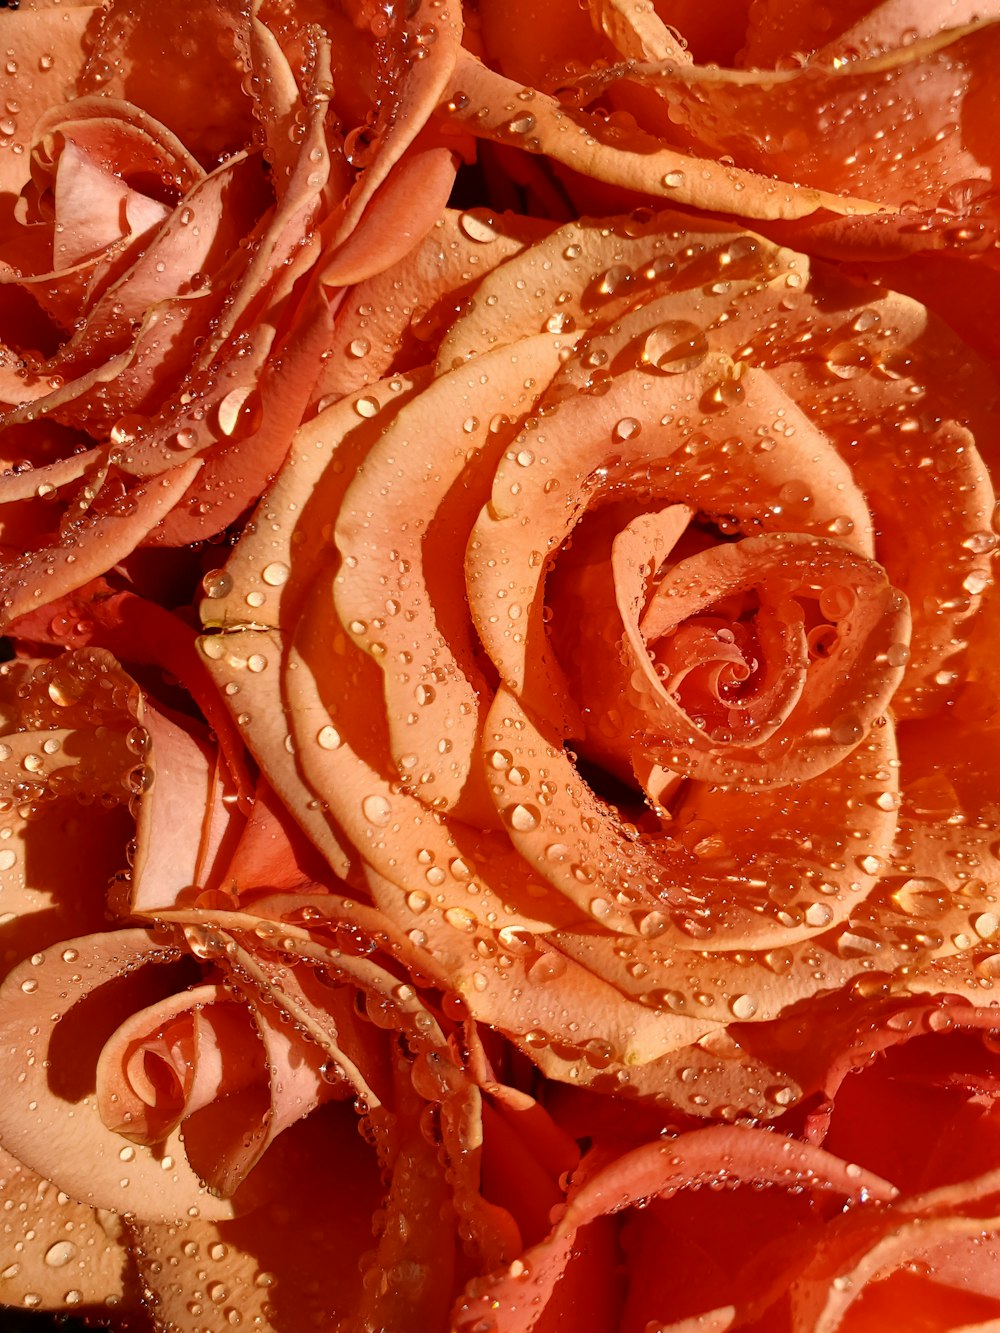 a bunch of roses with water droplets on them